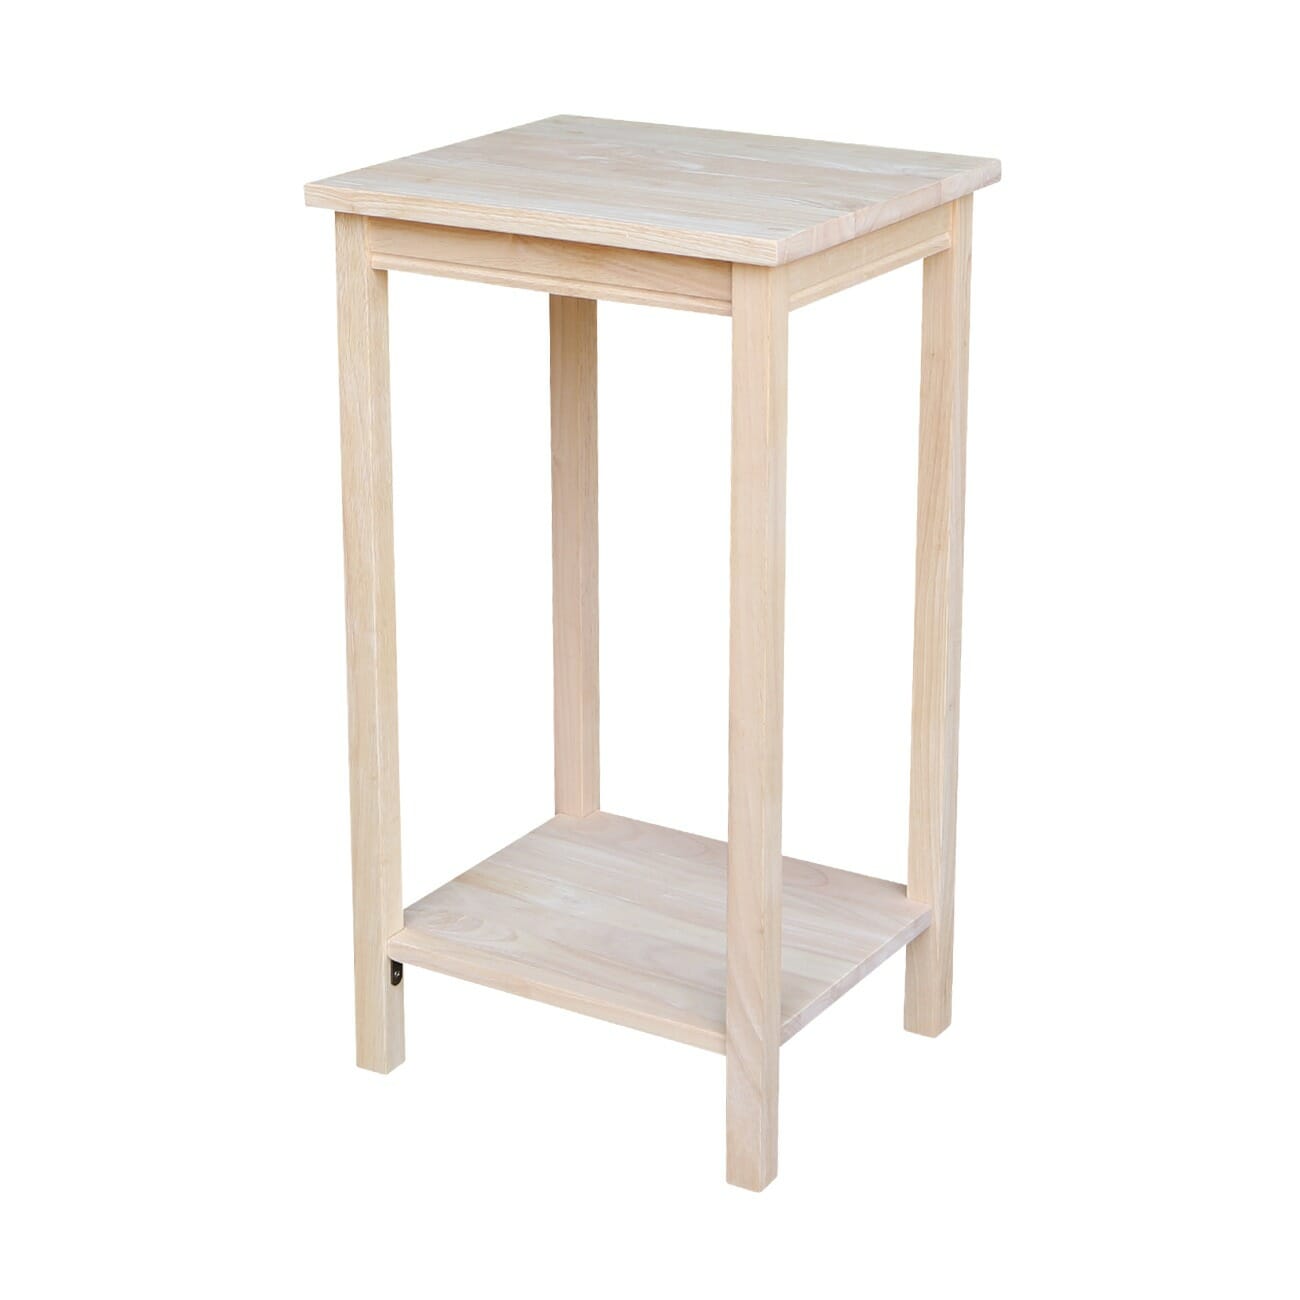 Ot 42 Portman 29 Inch Tall Side Table Unfinished Furniture Of Wilmington